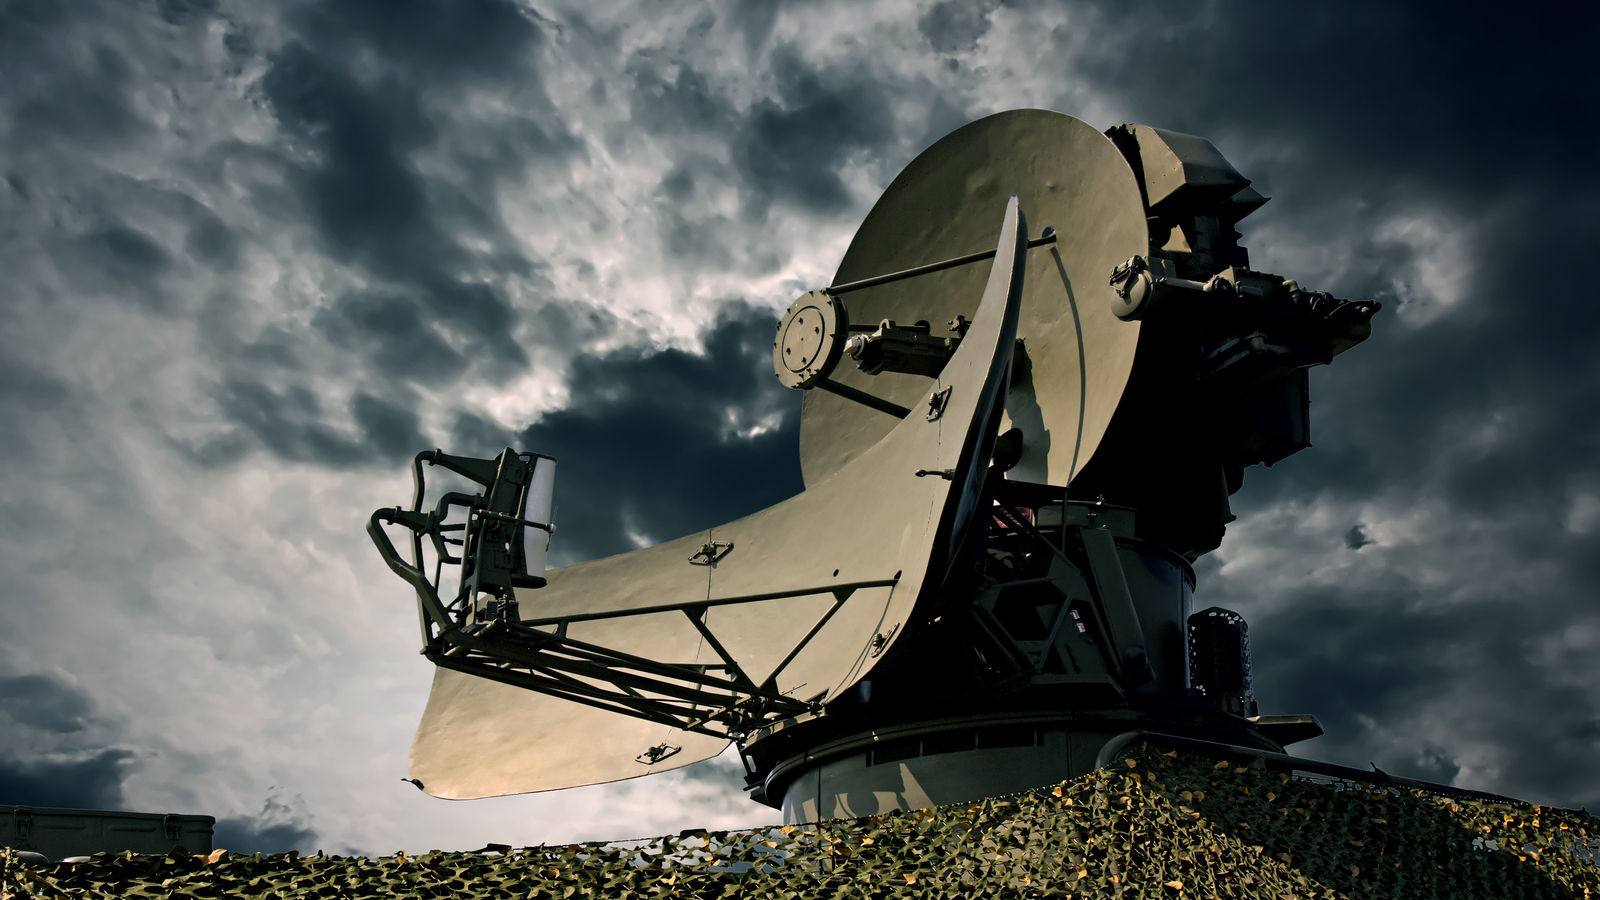 Large satellite against a backlit cloudy sky representing CTM stock.